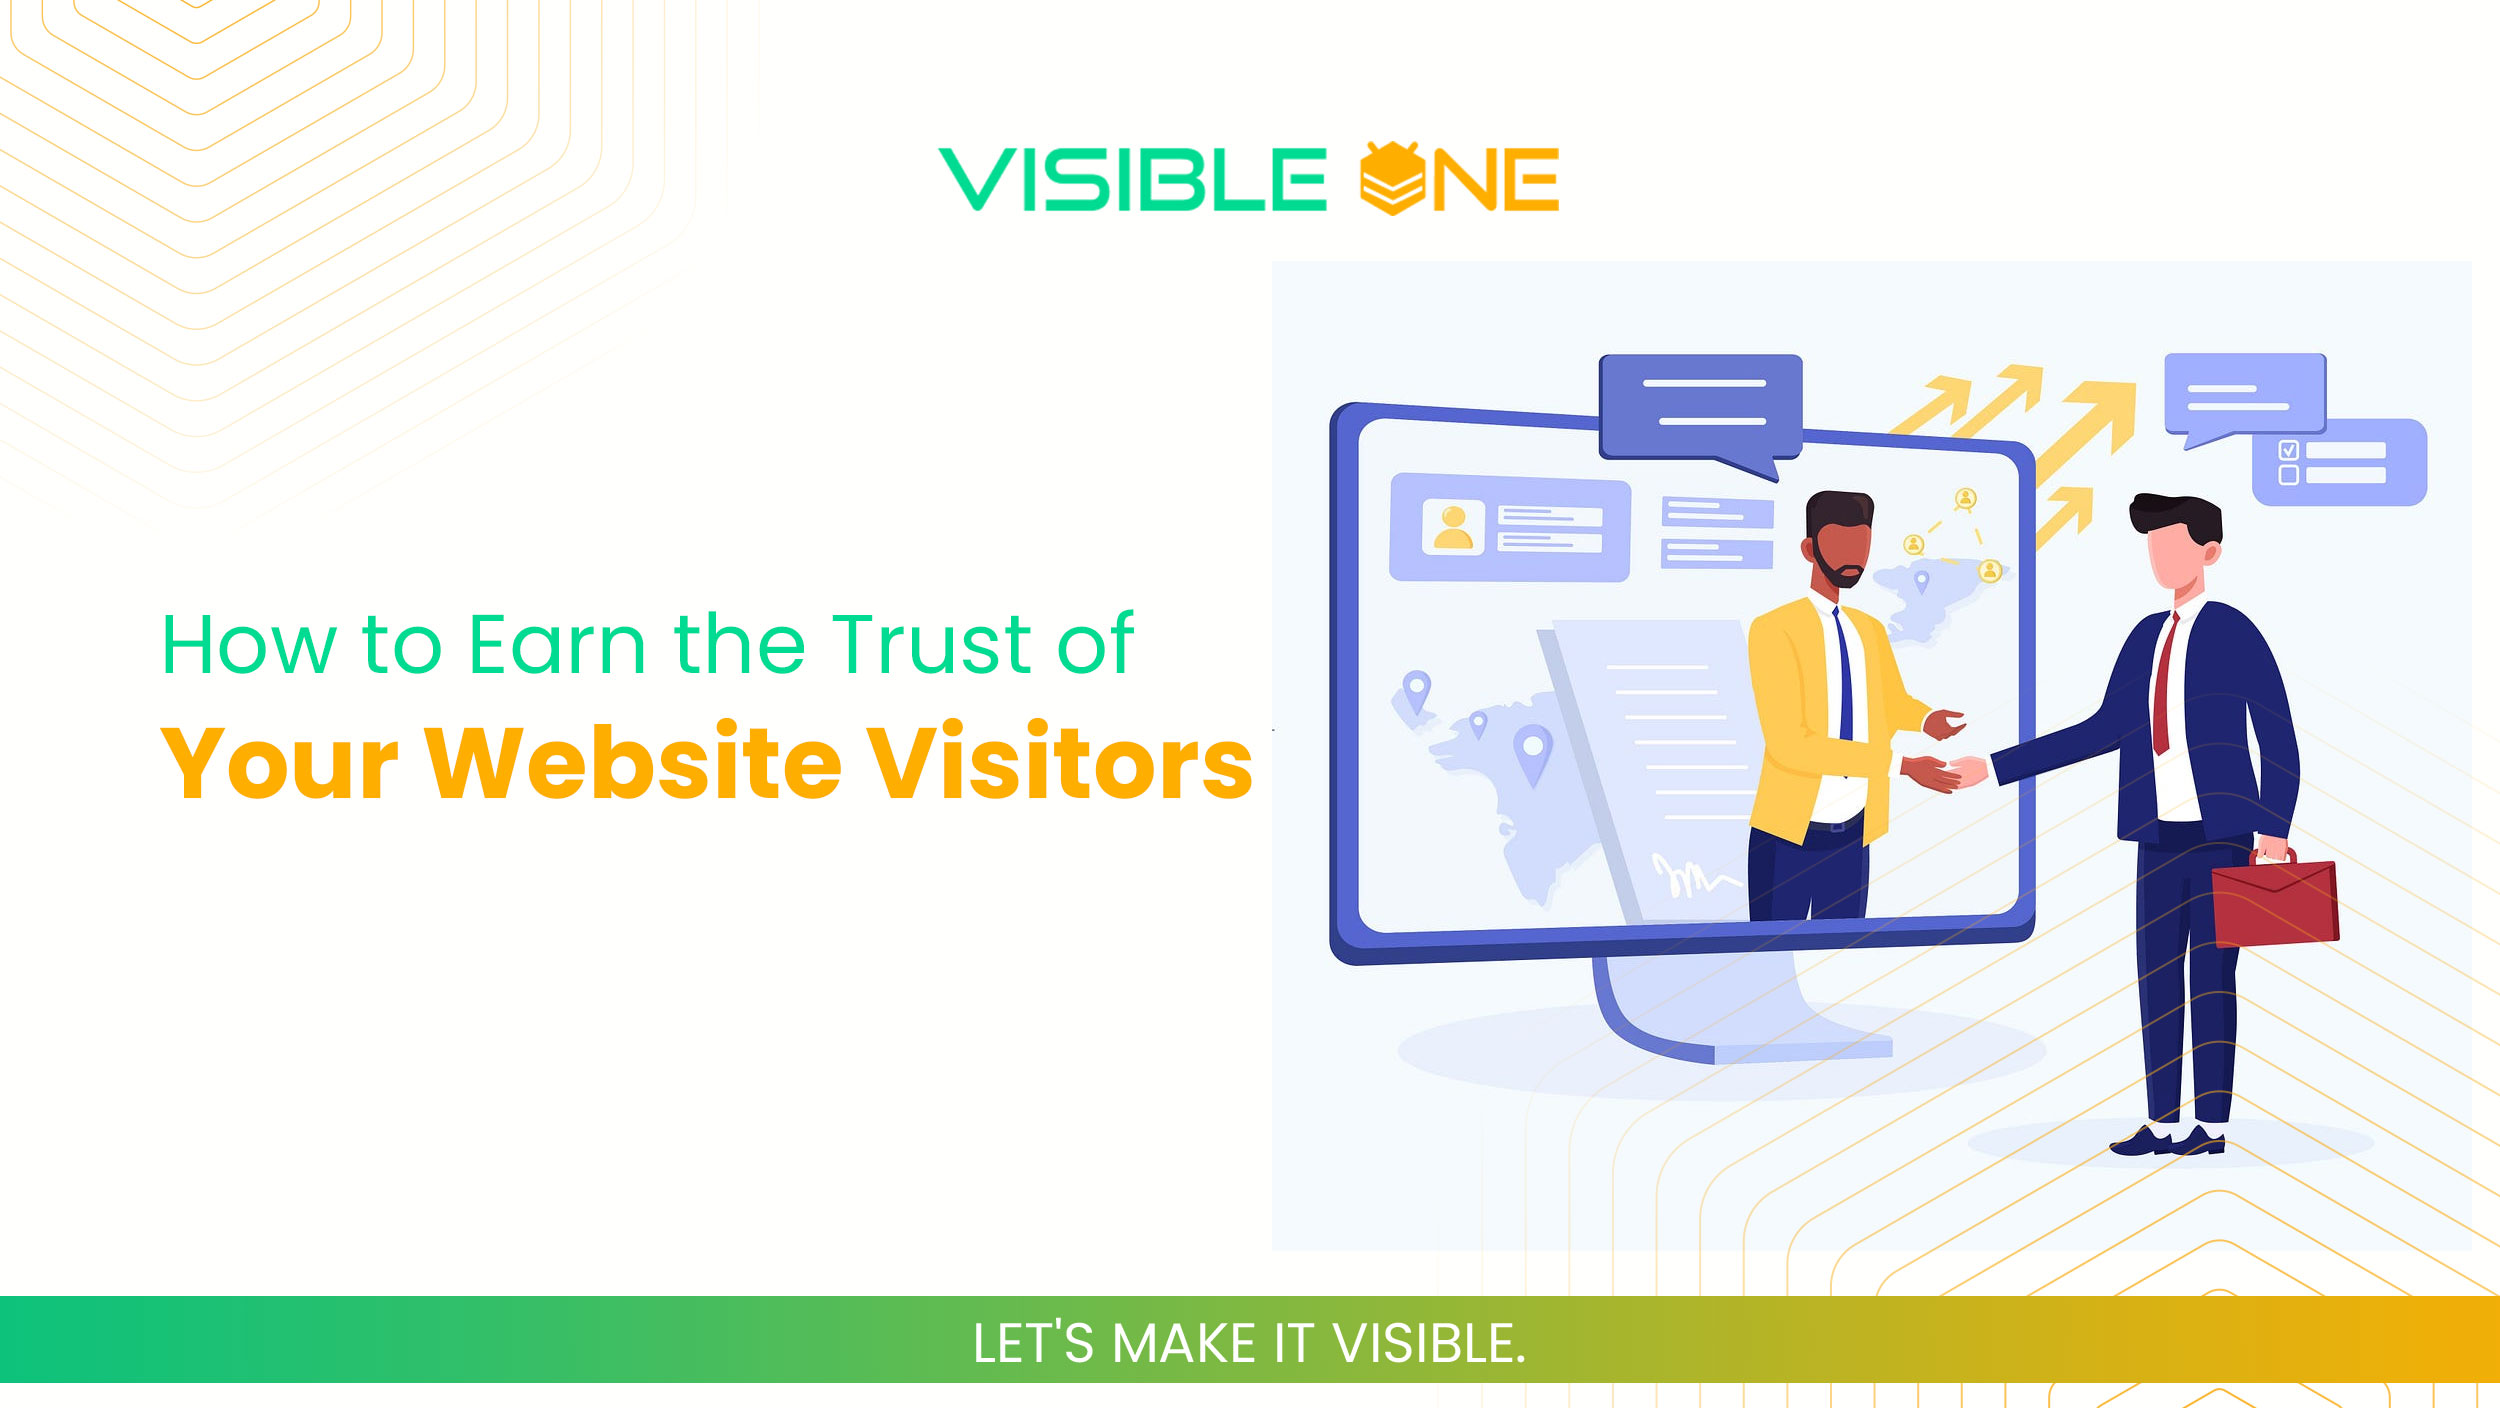 How to Earn the Trust of Your Website Visitors